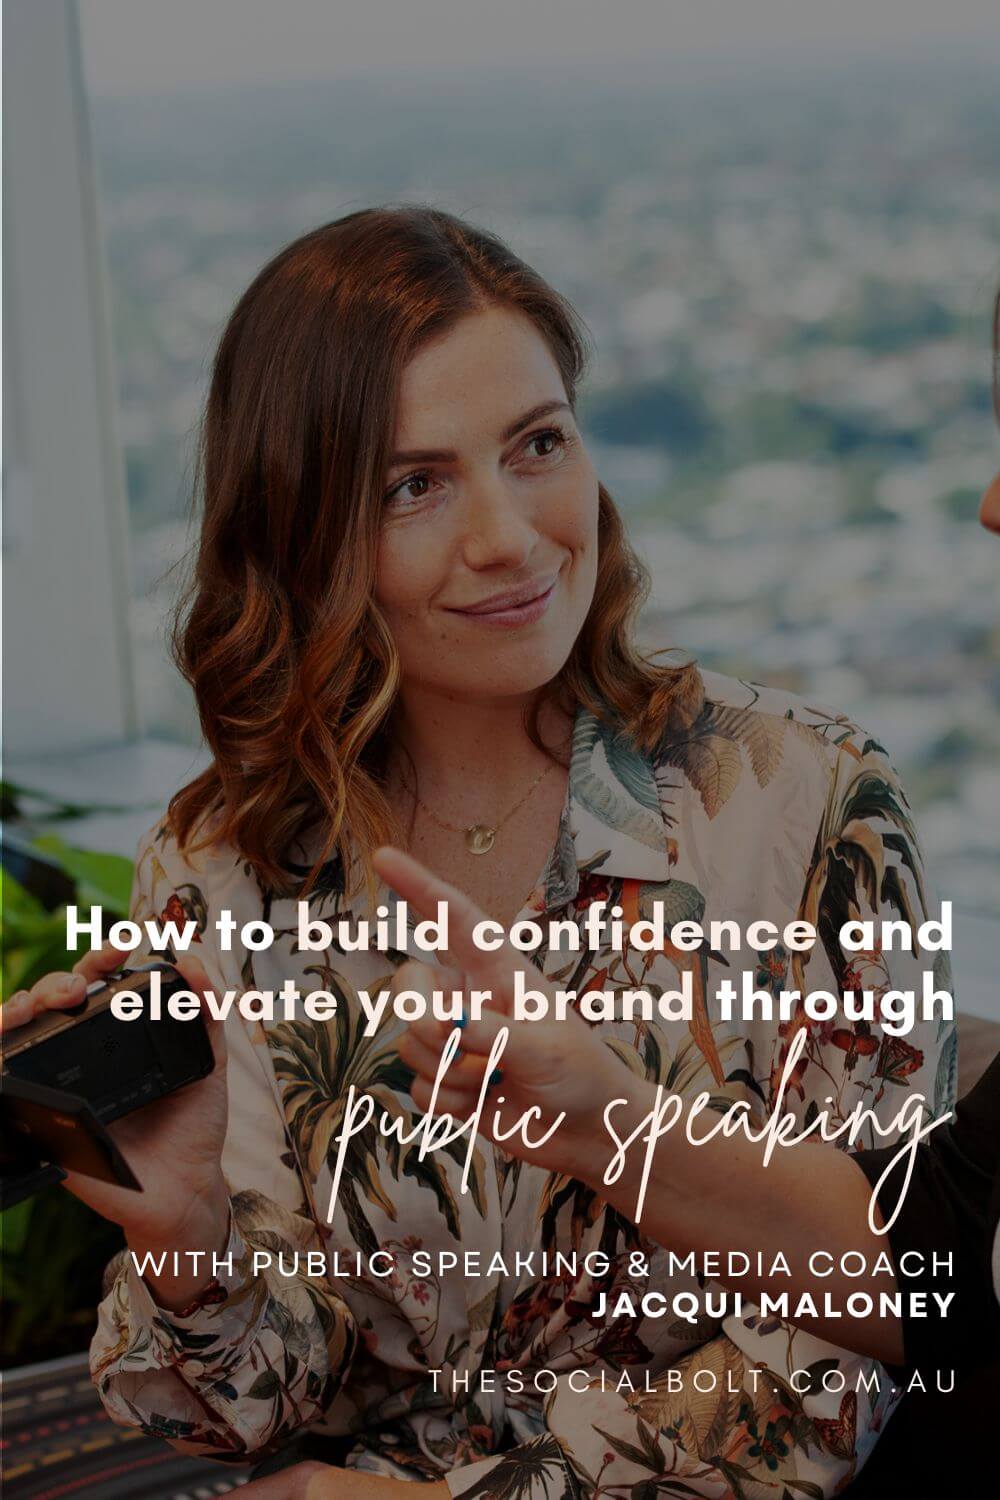 How To Build Confidence and Elevate Your Brand Through Public Speaking with Jacqui Maloney